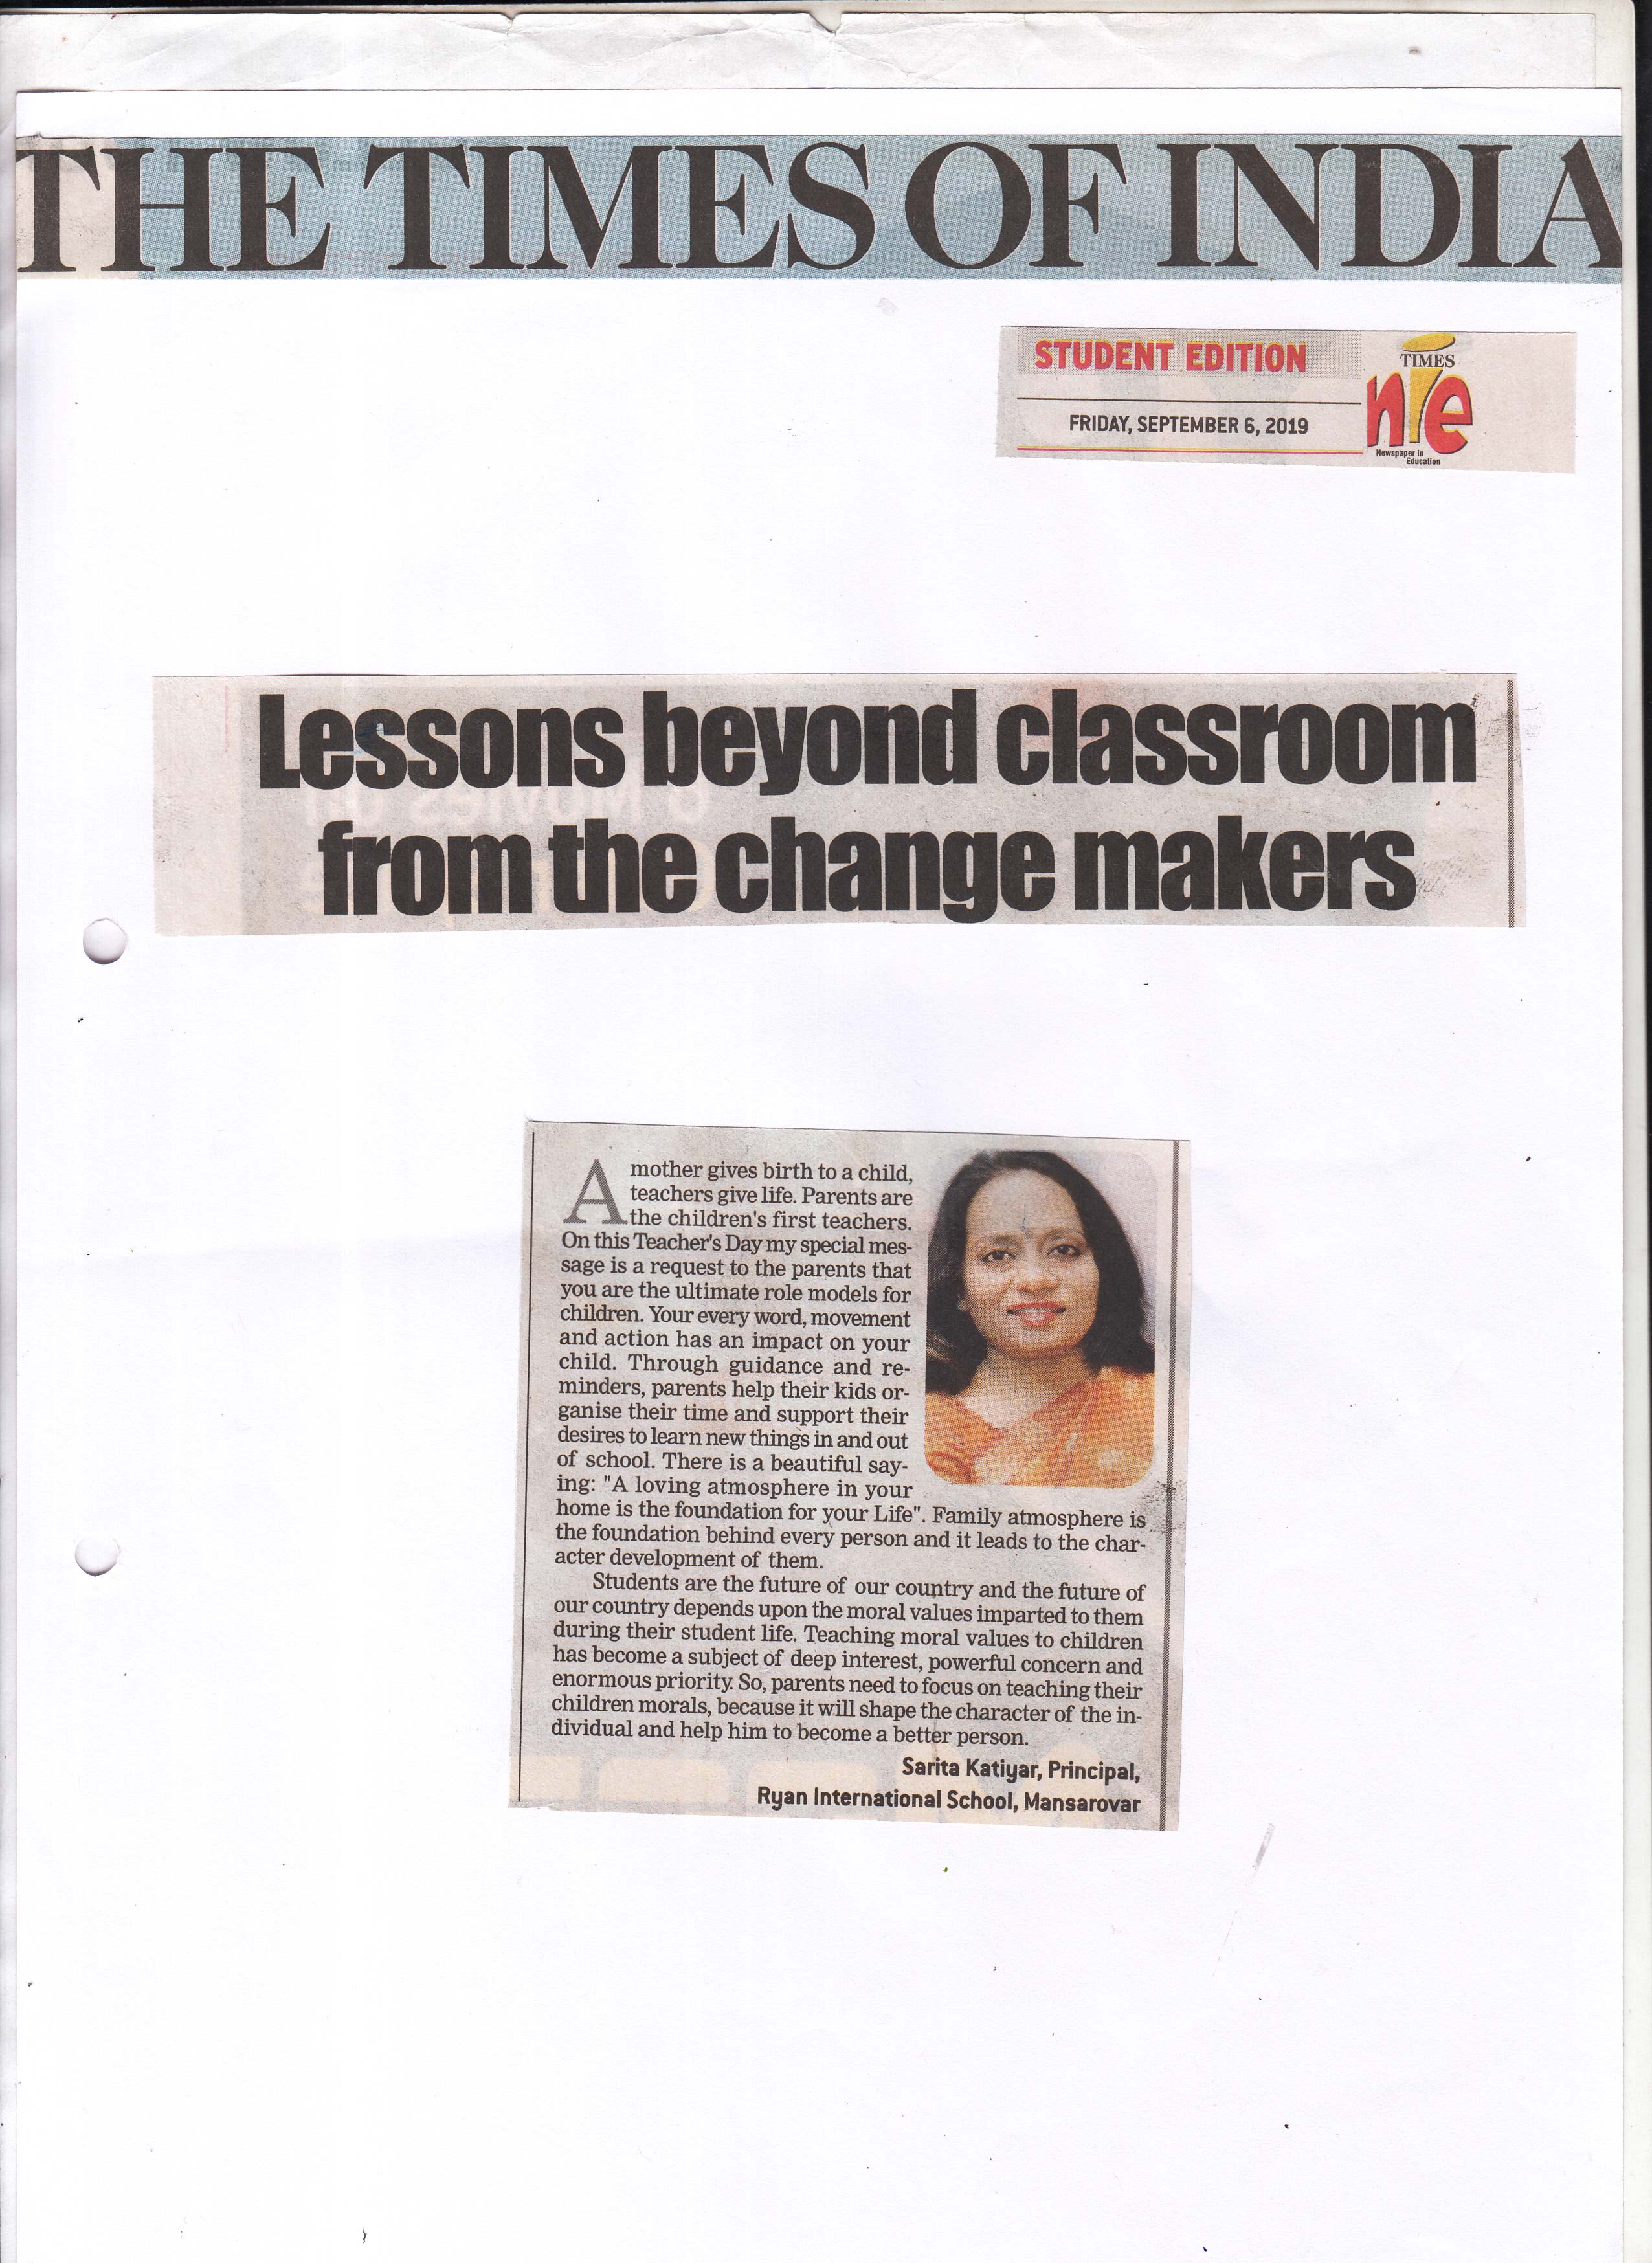 Lessons beyond classroom from the change makers featured in Times of India